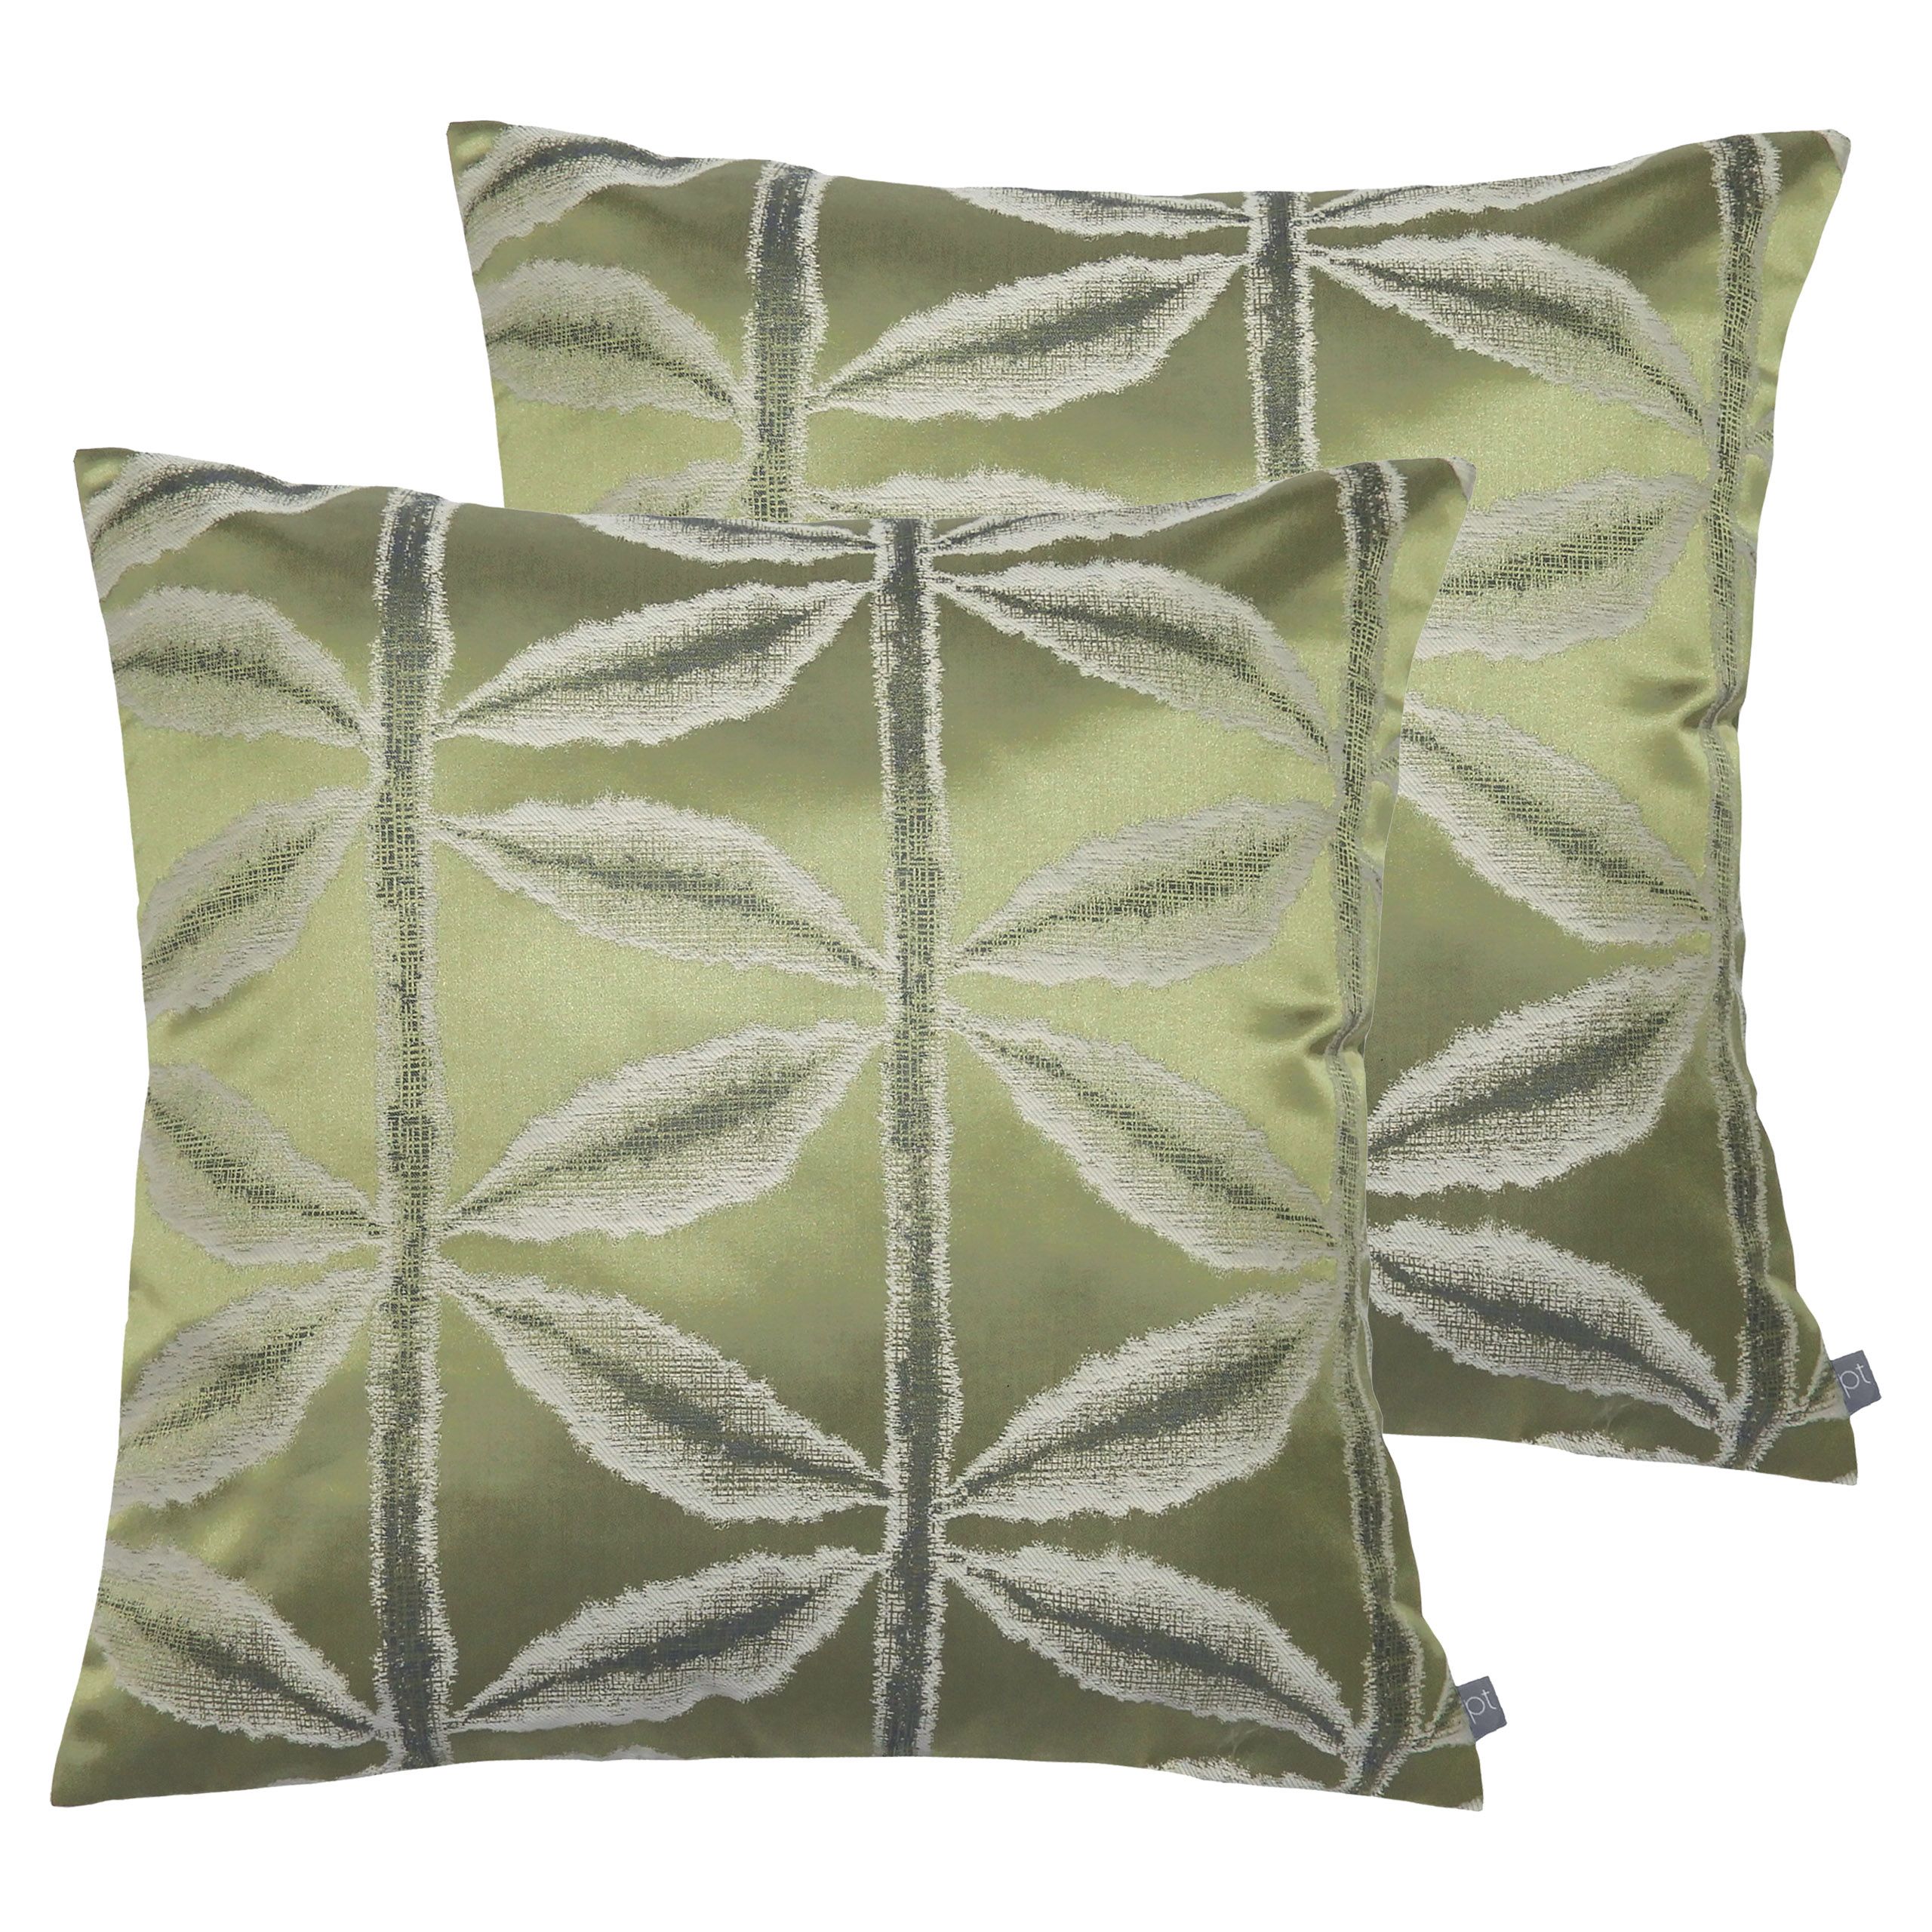 Distinguished with a subtle sheen this cushion is extremely versatile and would compliment many interior schemes.